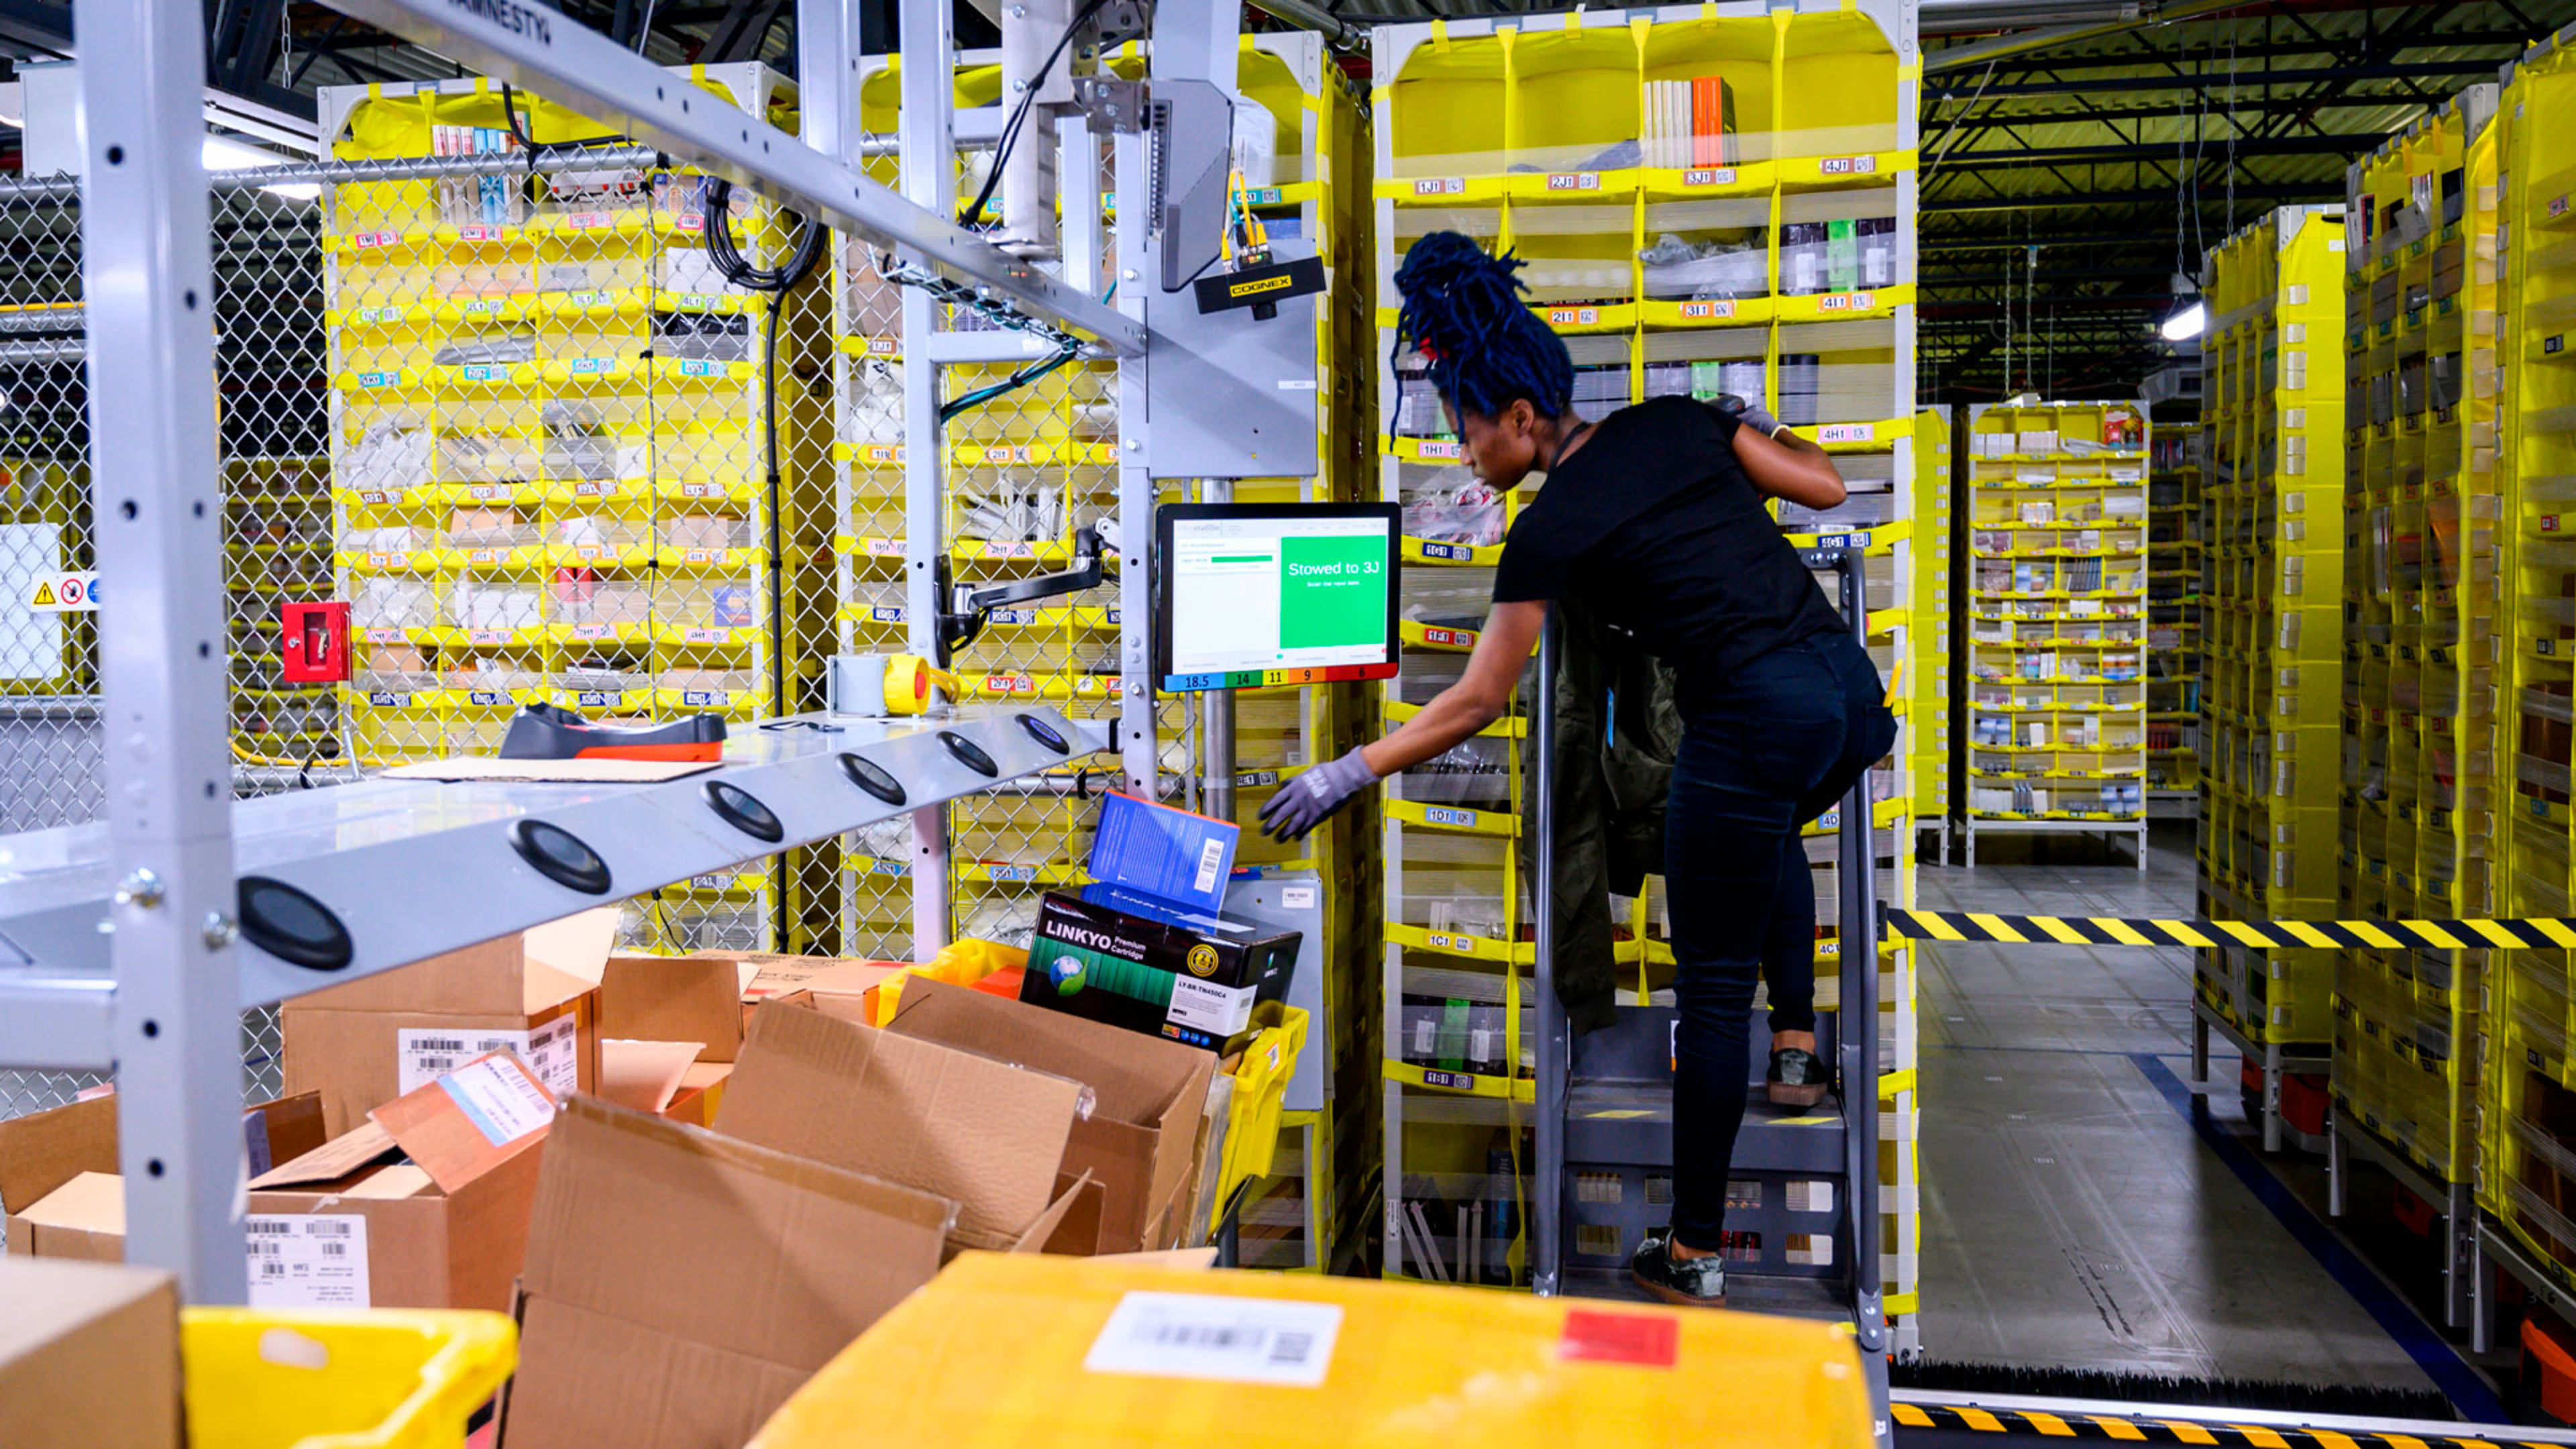 Prime Day for a union? Not yet at this Amazon warehouse